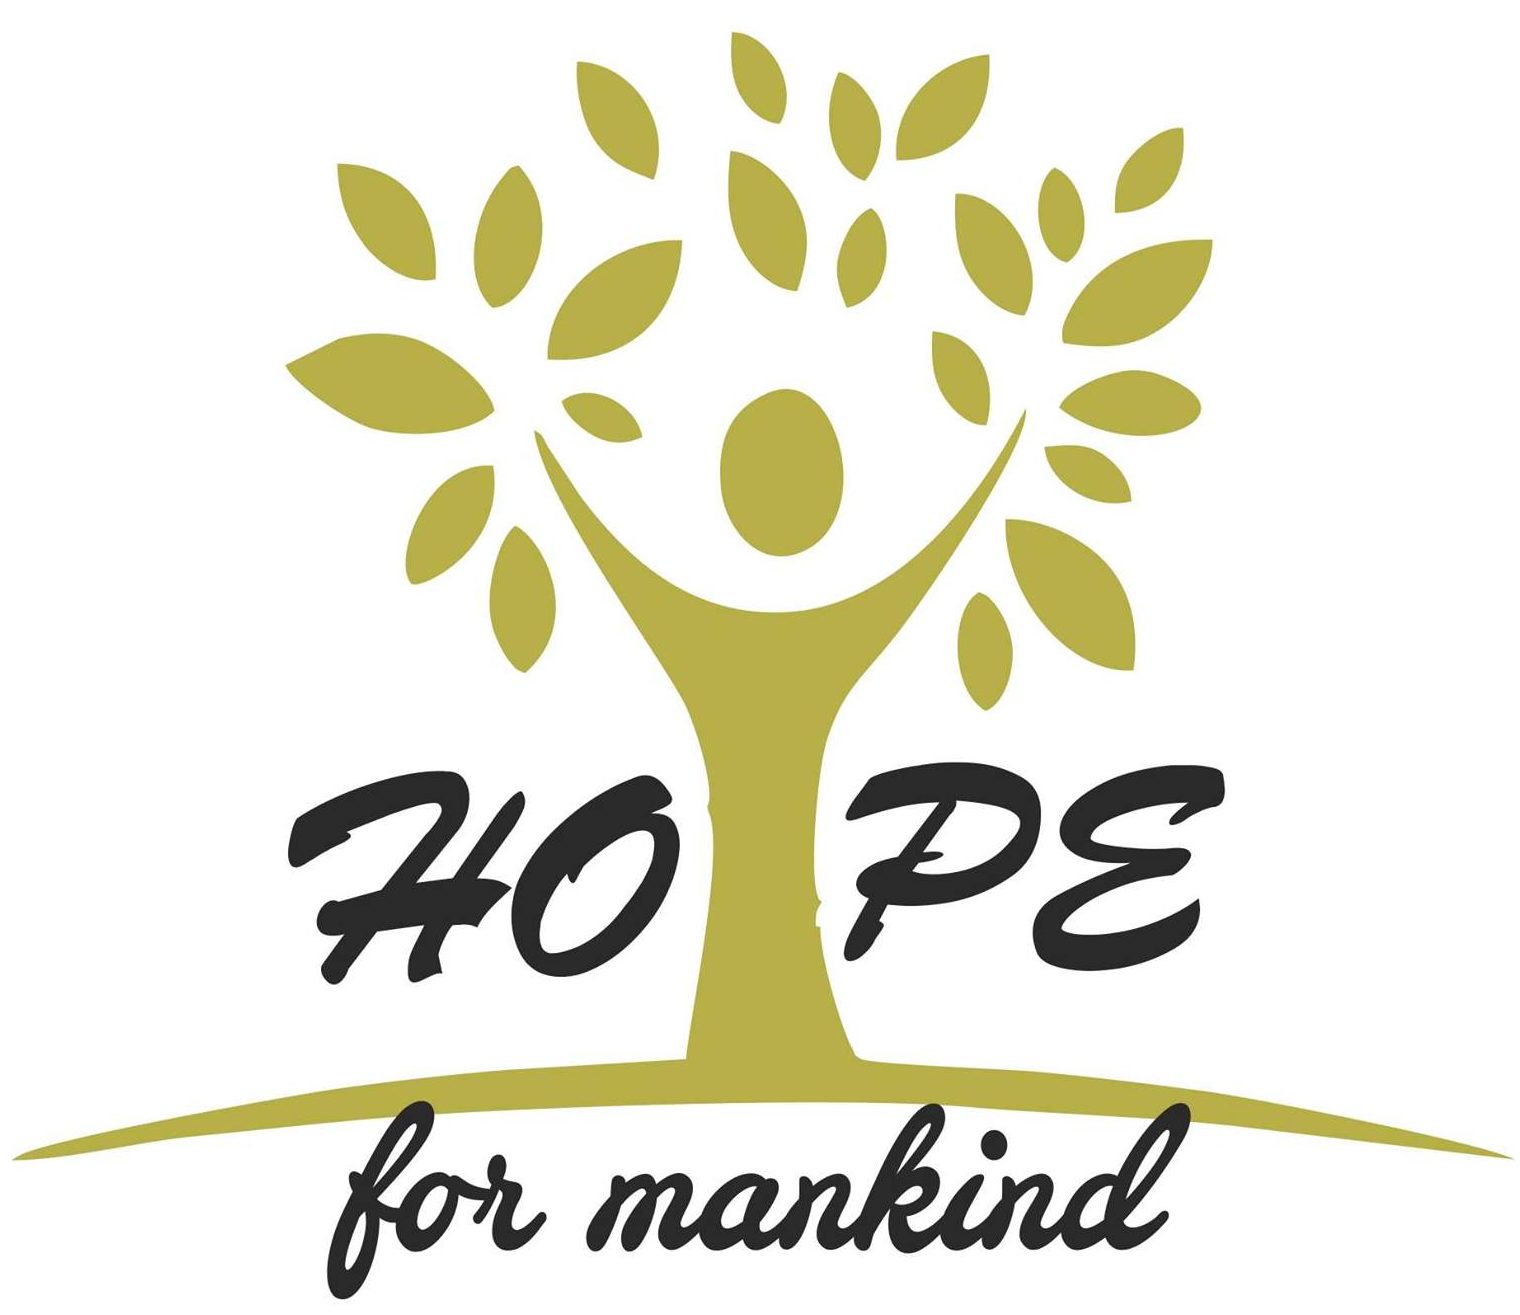 Hope For Mankind – Non profit charity organisation based in Lancashire